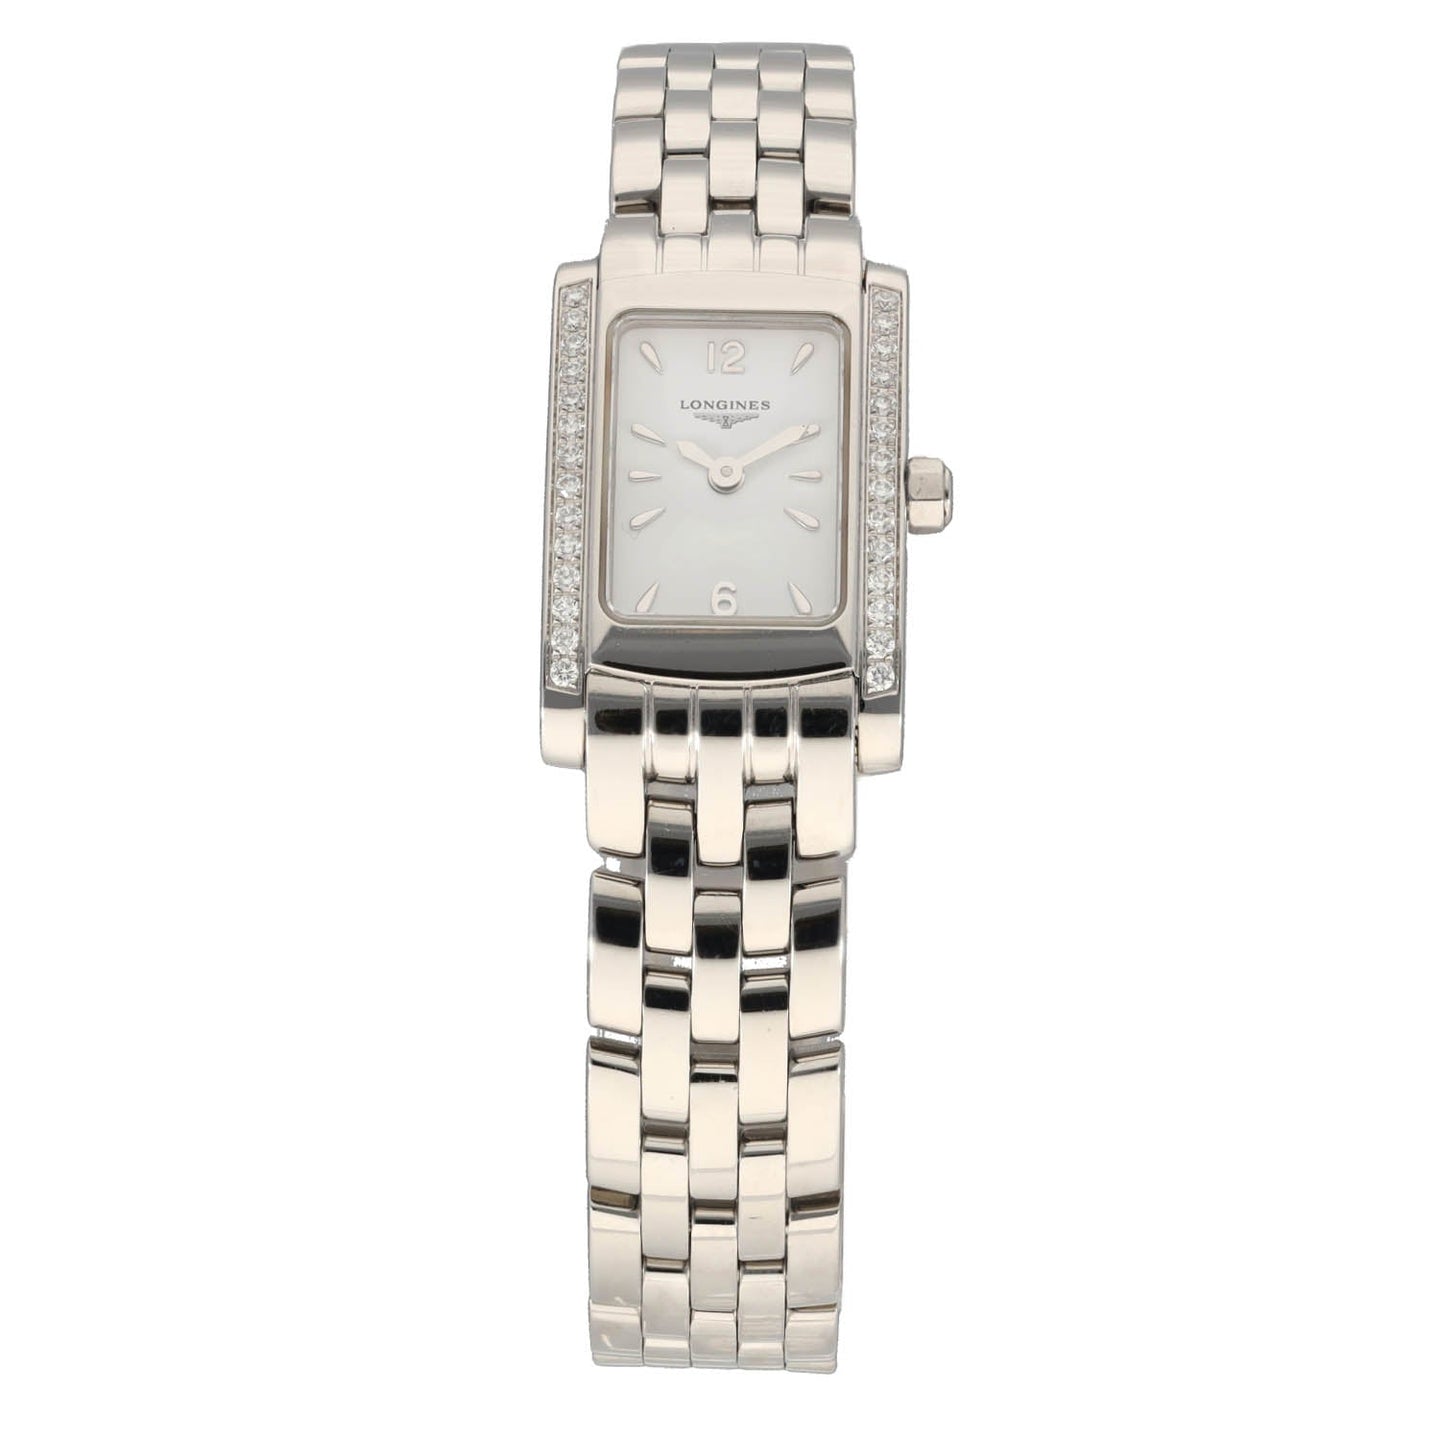 Longines DolceVita L5.158.0 16mm Stainless Steel Ladies Watch